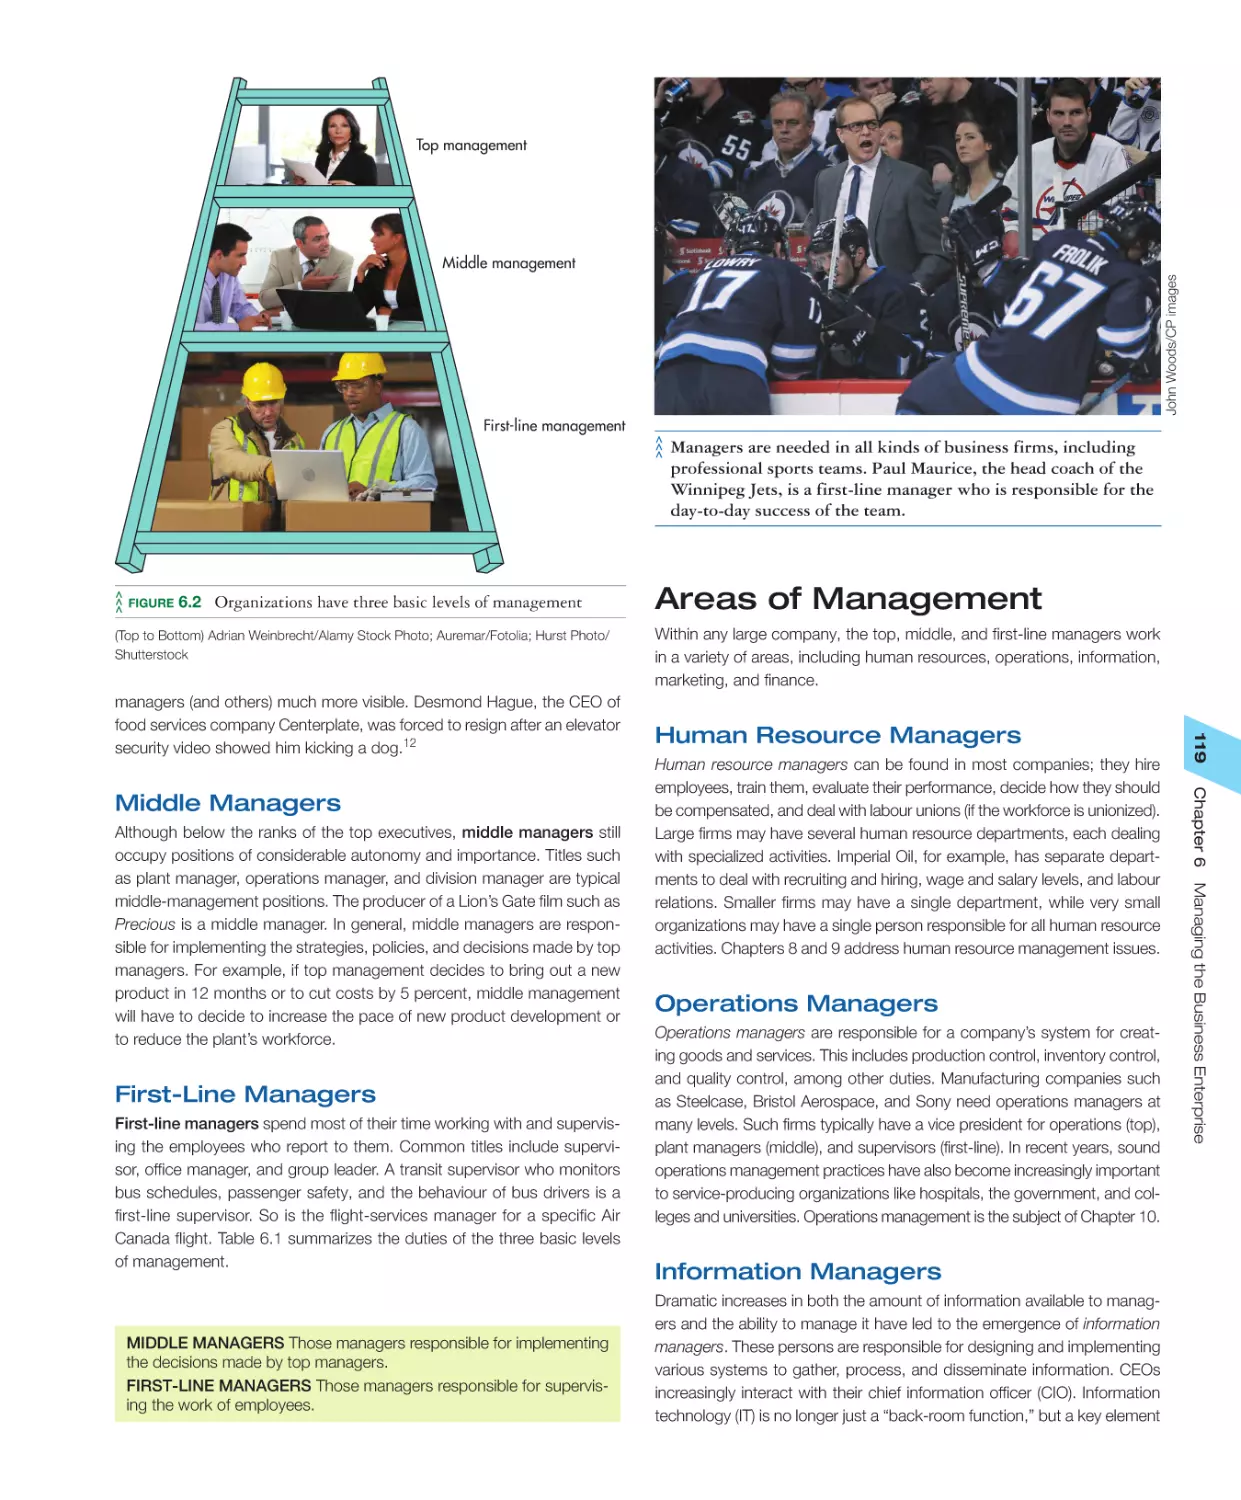 Areas of Management